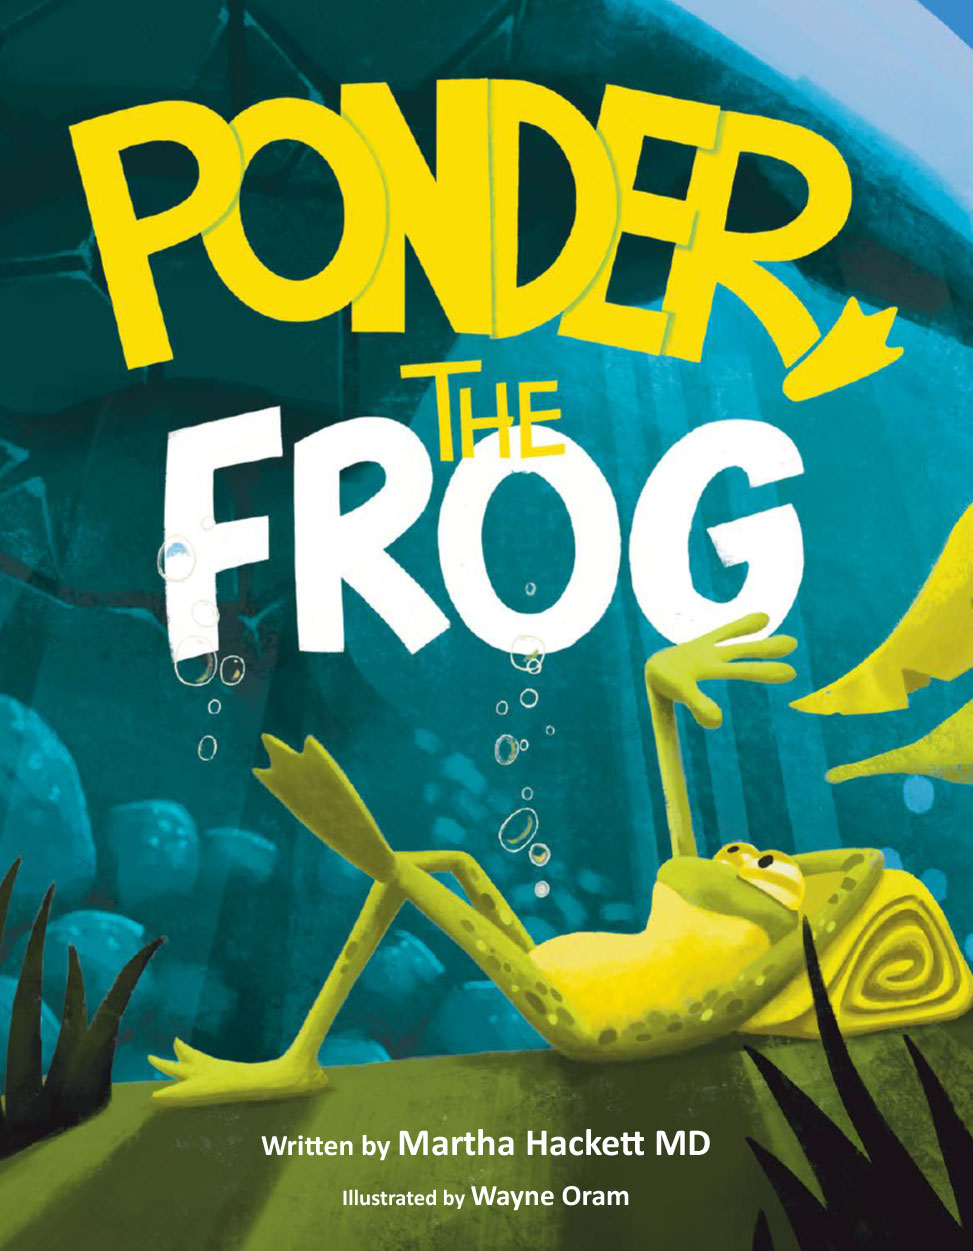 "Ponder, the Frog" by Martha Hackett Book Cover